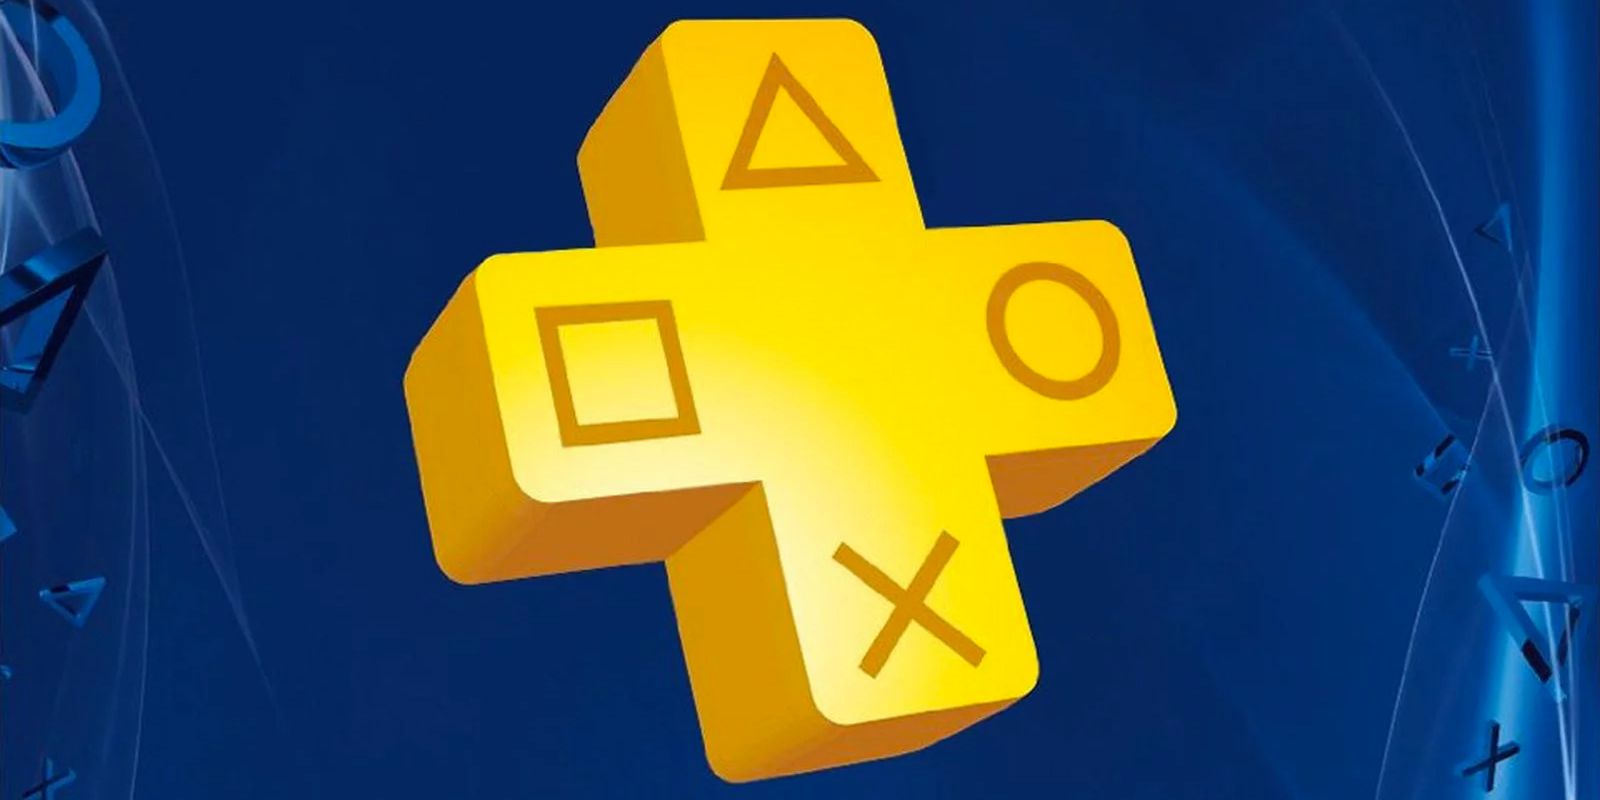 difference between playstation plus and playstation now